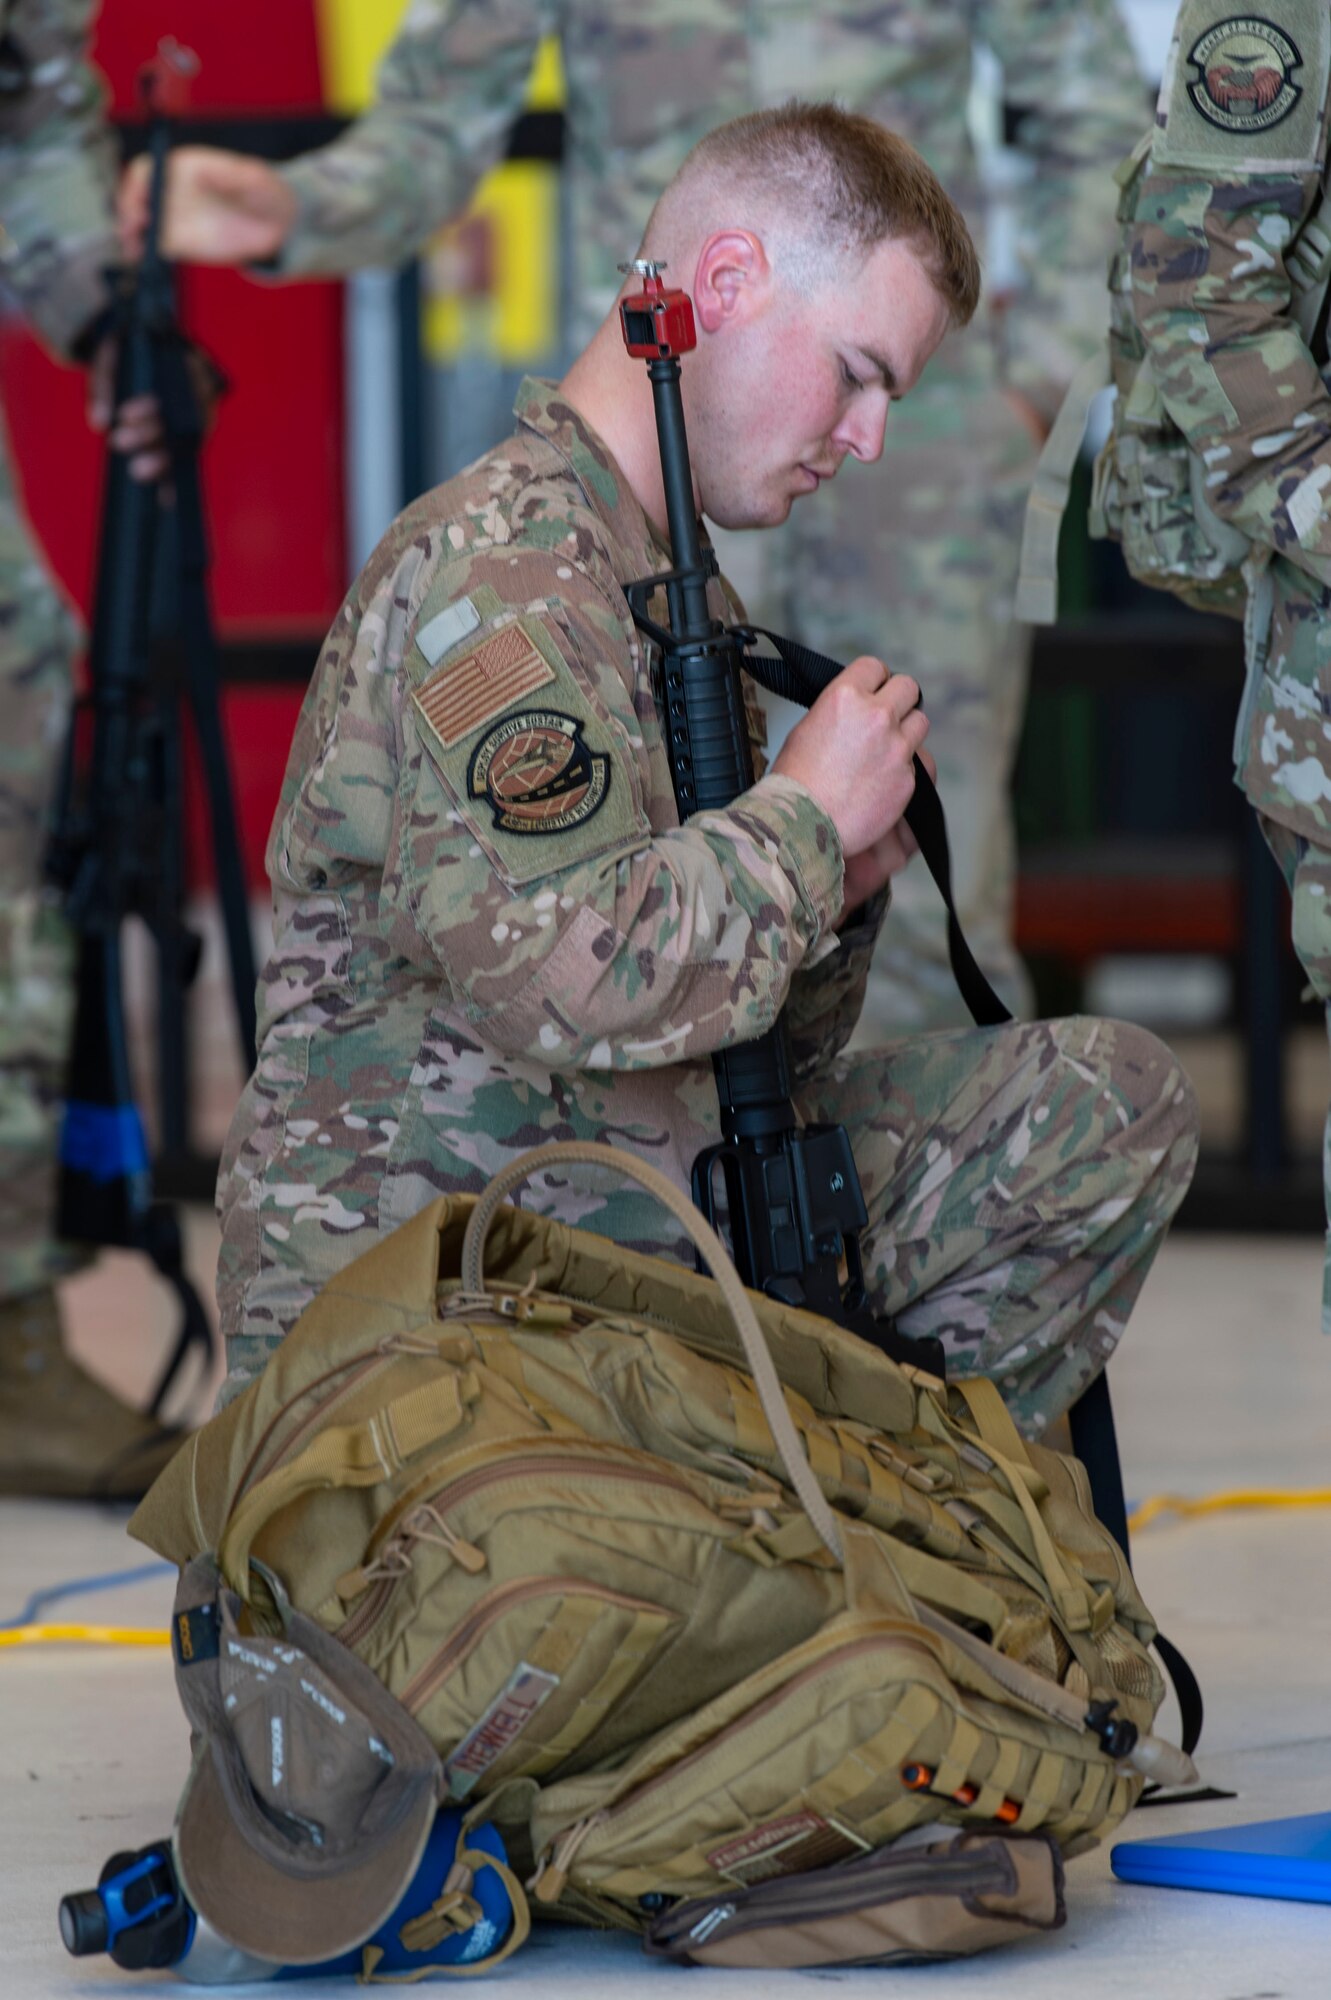 Tech. Sgt. Dalton Newell, 436th Logistics Readiness Squadron material control noncommissioned officer in charge, makes adjustments to his weapon strap during Liberty Eagle Readiness Exercise 2022 at Dover Air Force Base, Delaware, July 11, 2022. The 436th and 512th Airlift Wings tested their ability to generate, employ and sustain airpower across the world in a simulated contested and degraded operational environment. (U.S. Air Force photo by Roland Balik)